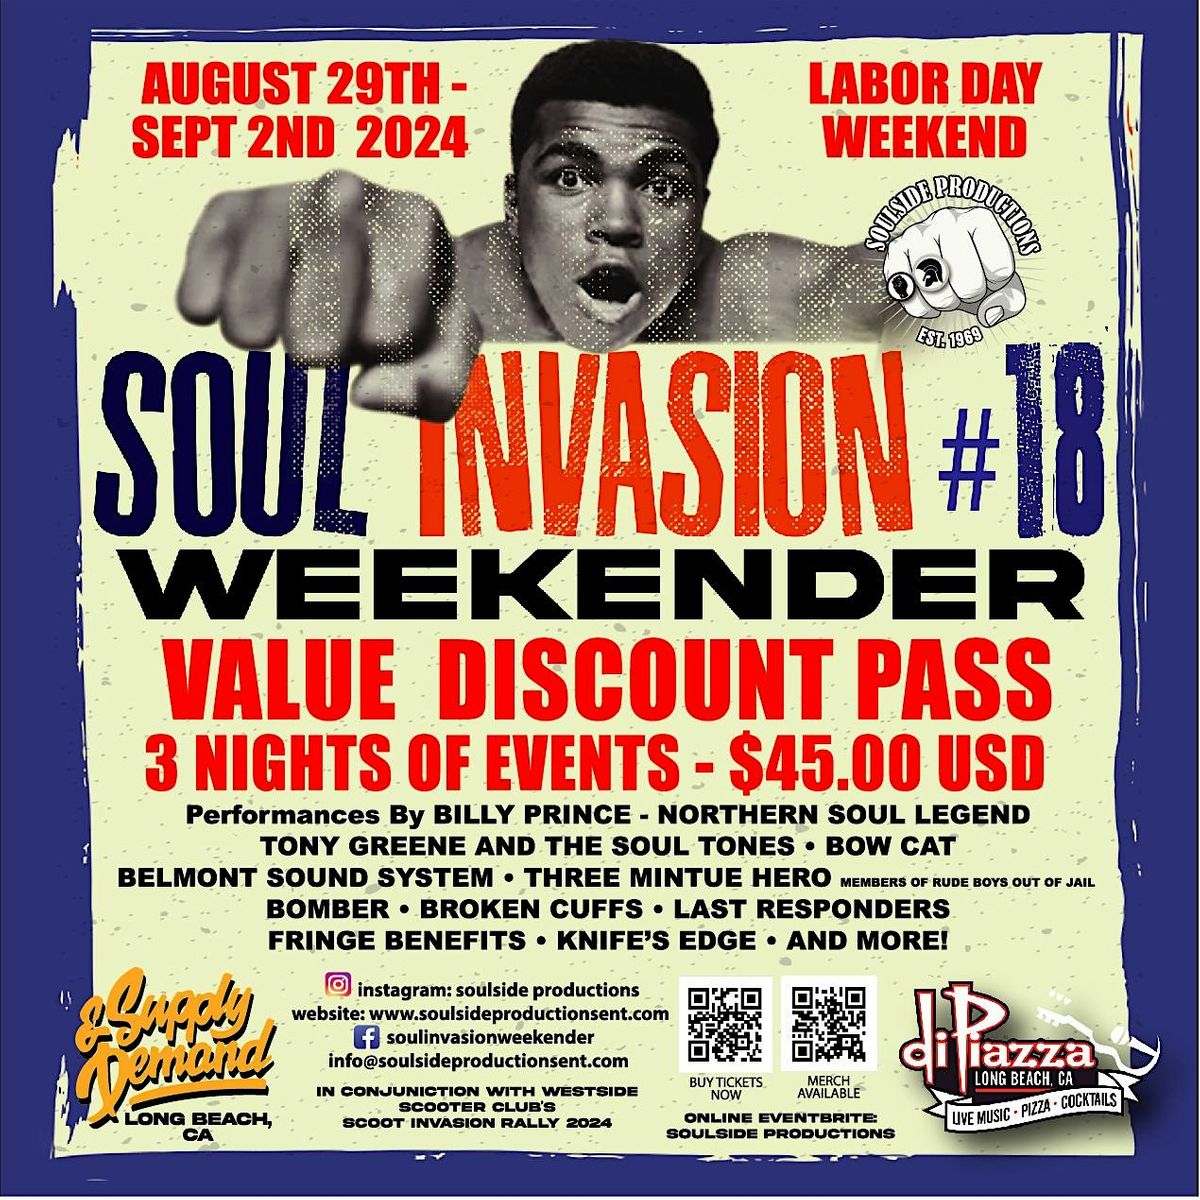 SOUL INVASION WEEKENDER - VALUE DISCOUNT PASS - $45.00 DOLLARS